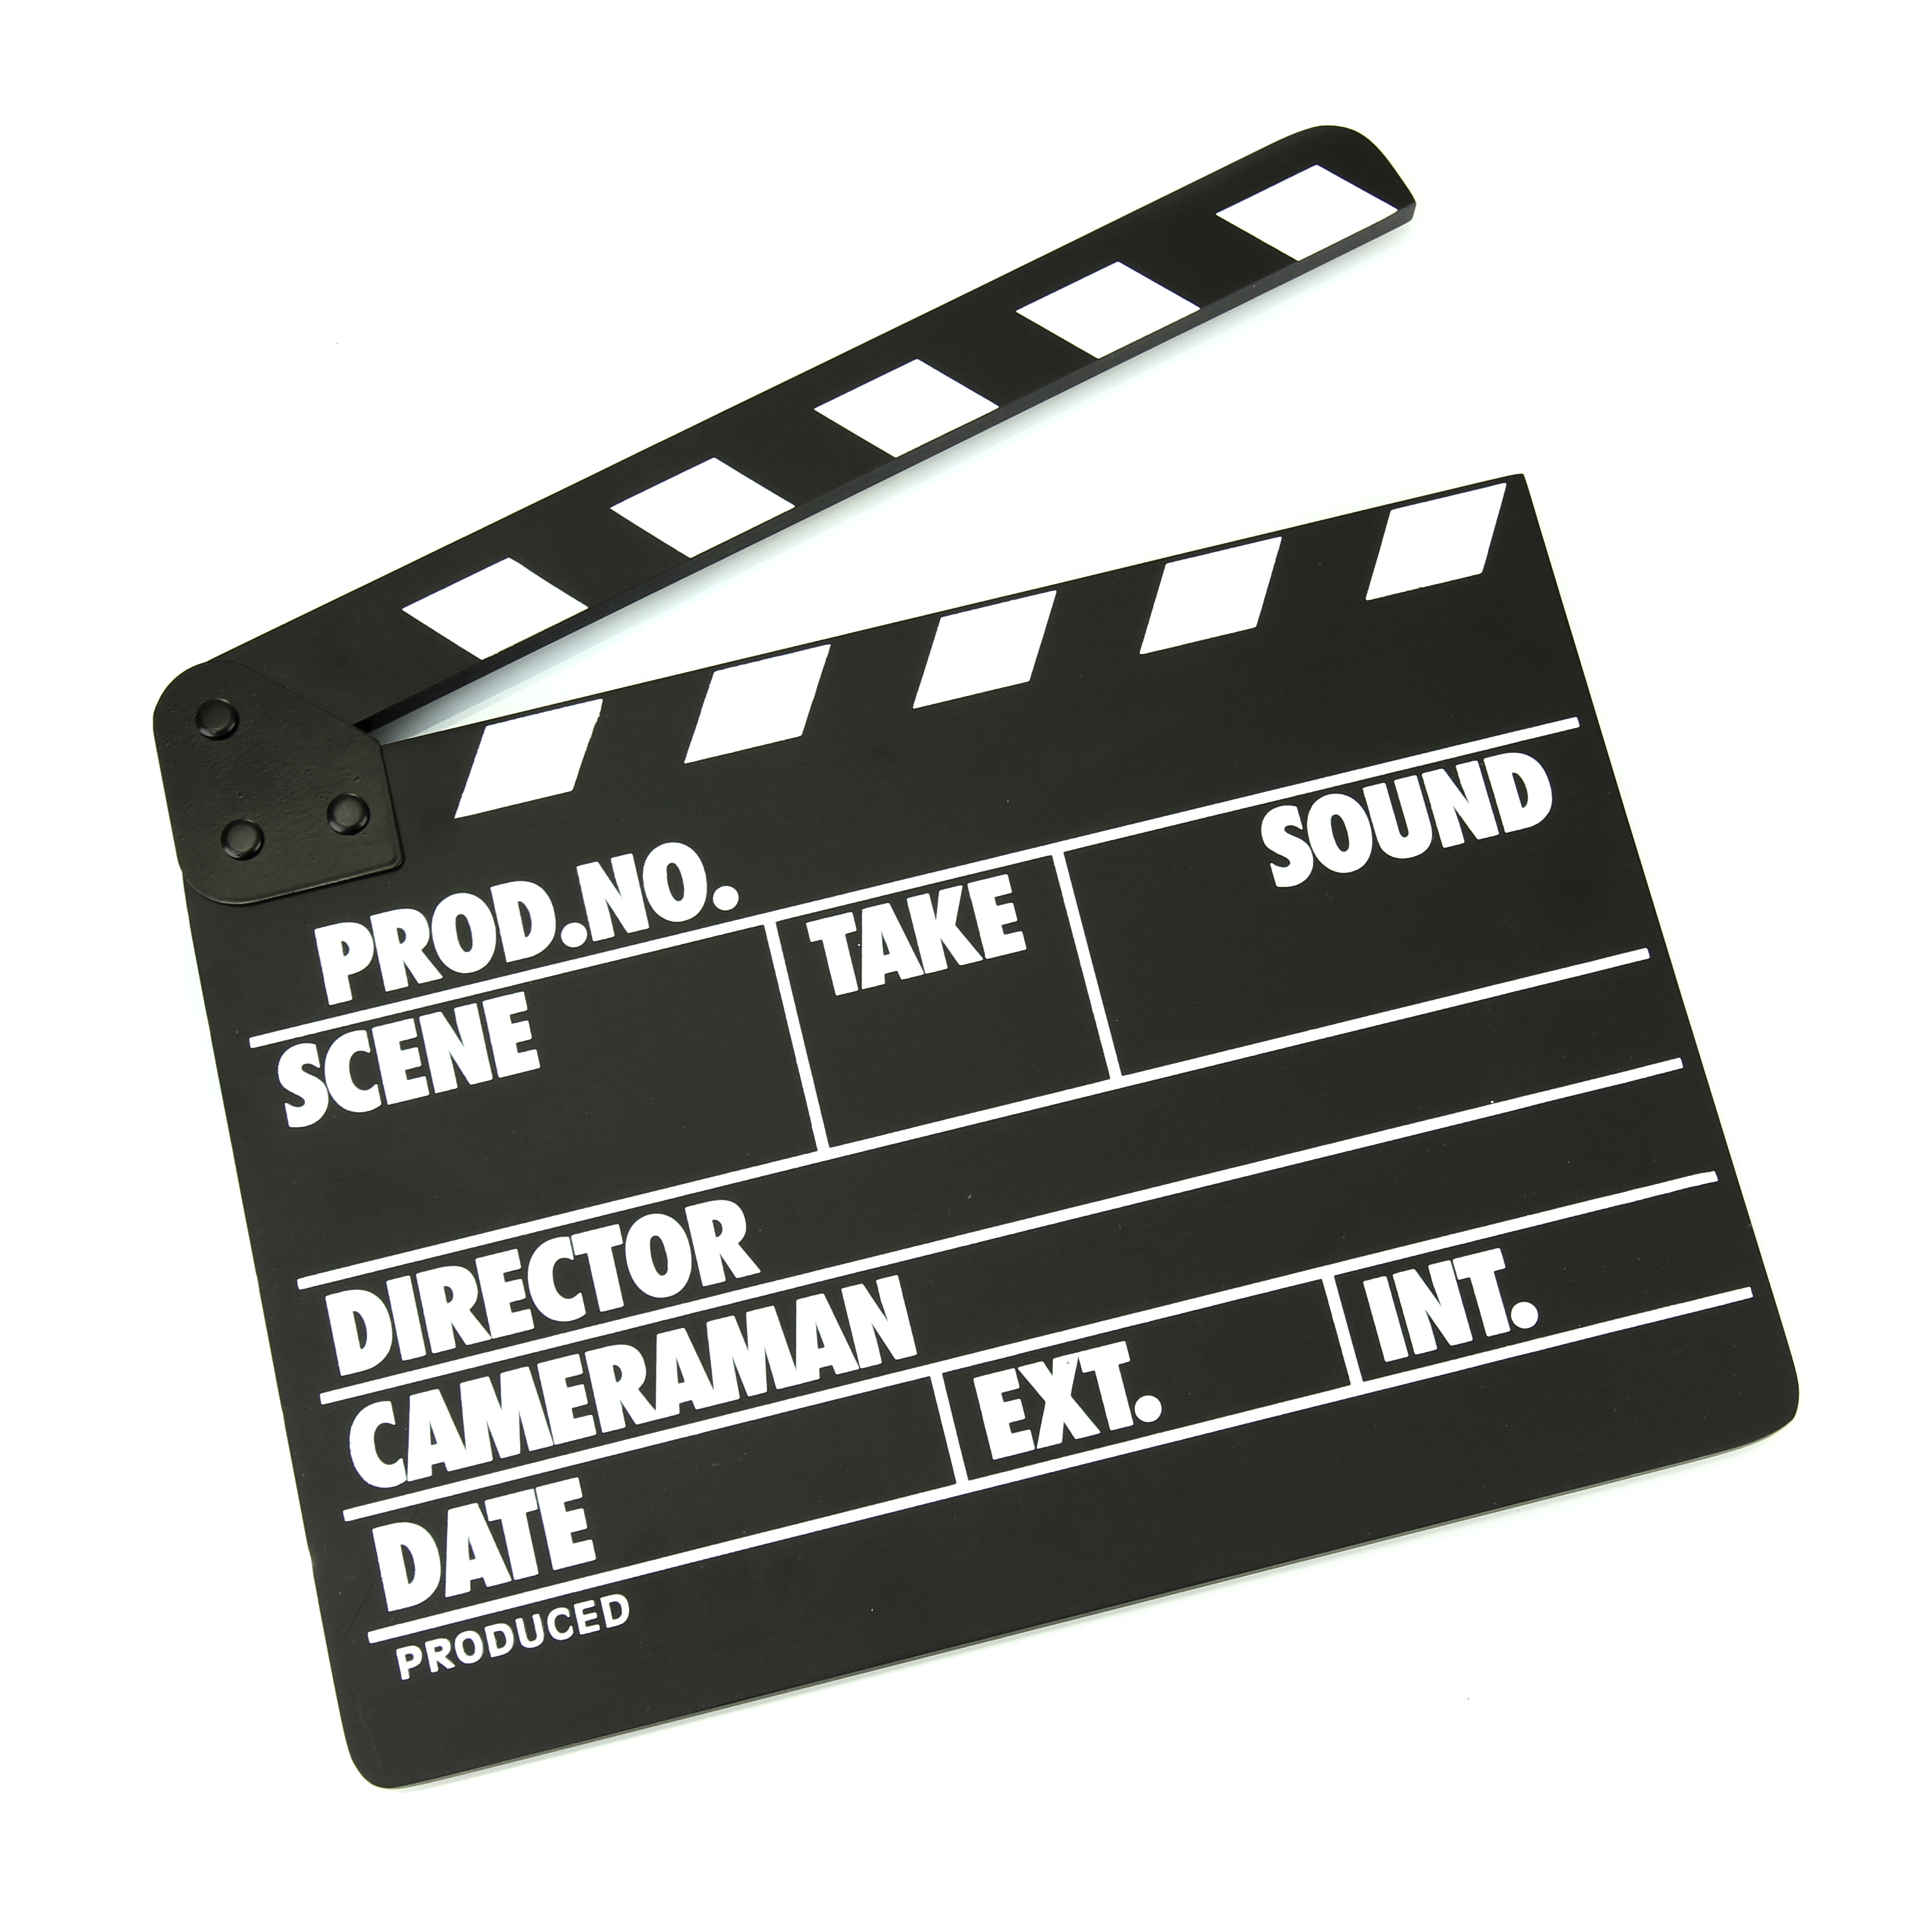 illustration of a movie clapperboard